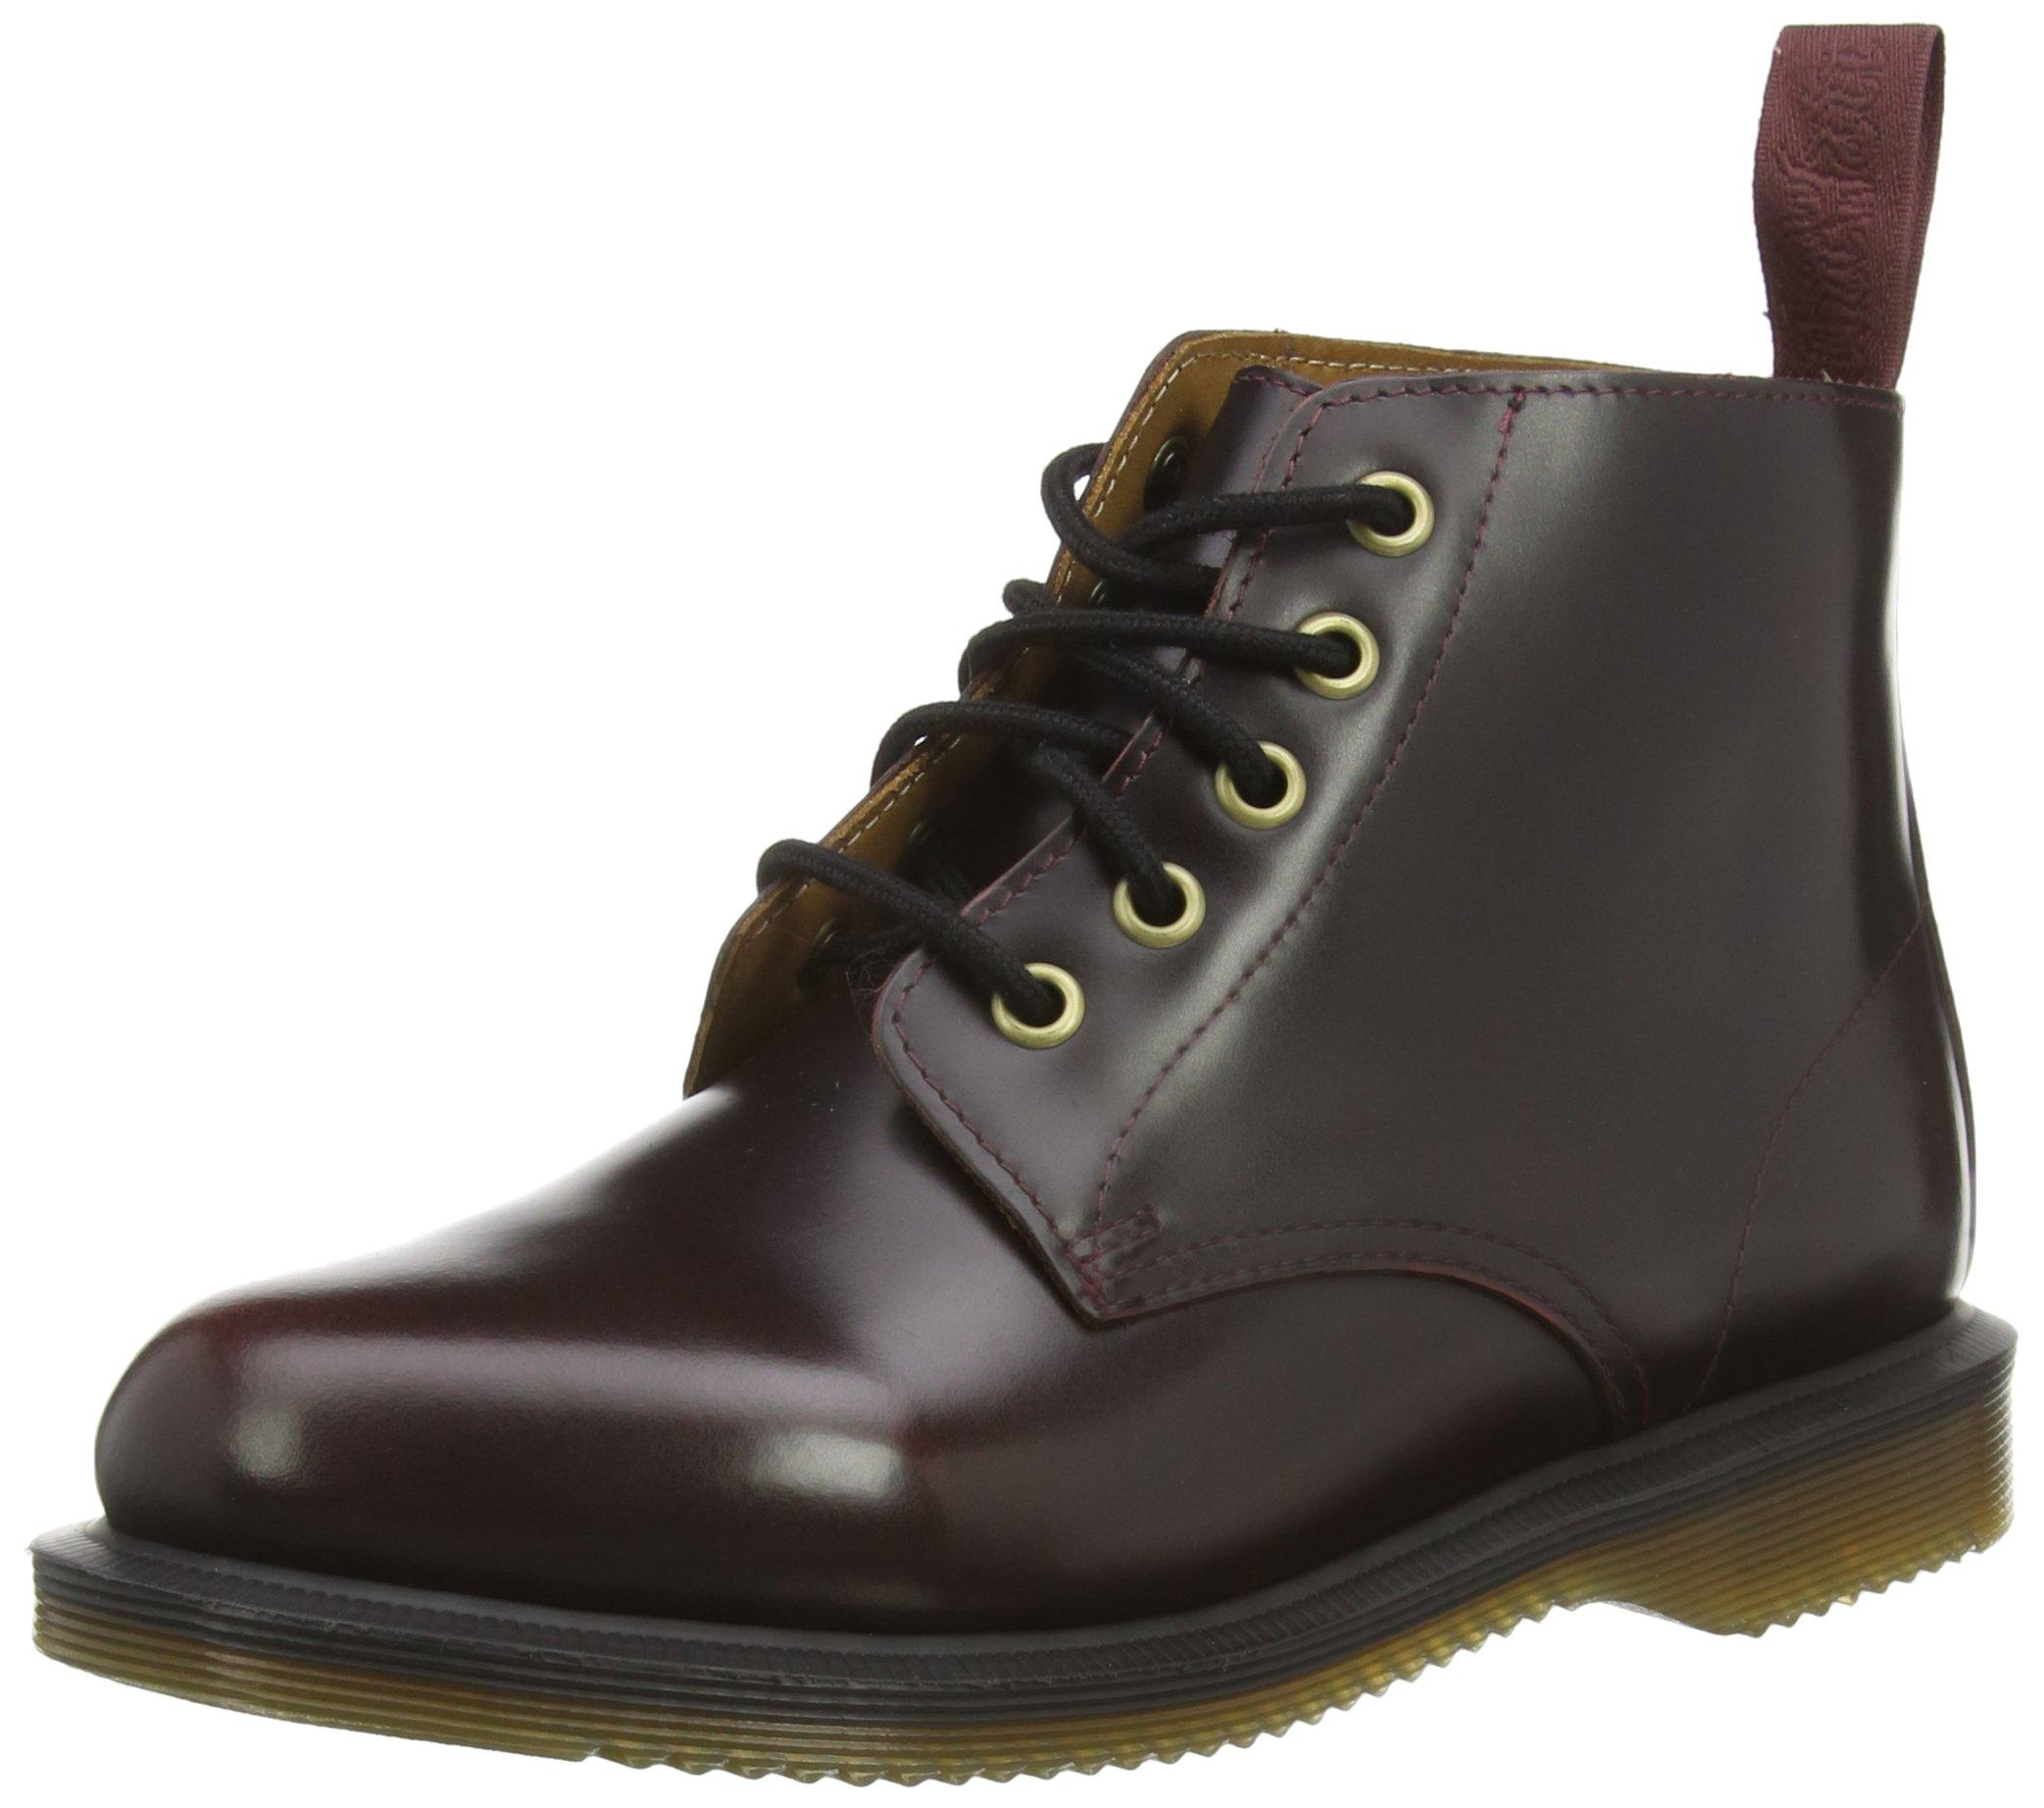 Dr. Martens Emmeline Arcadia Leather Lace Up Ankle Boots in Cherry Red  (Black) - Save 50% - Lyst